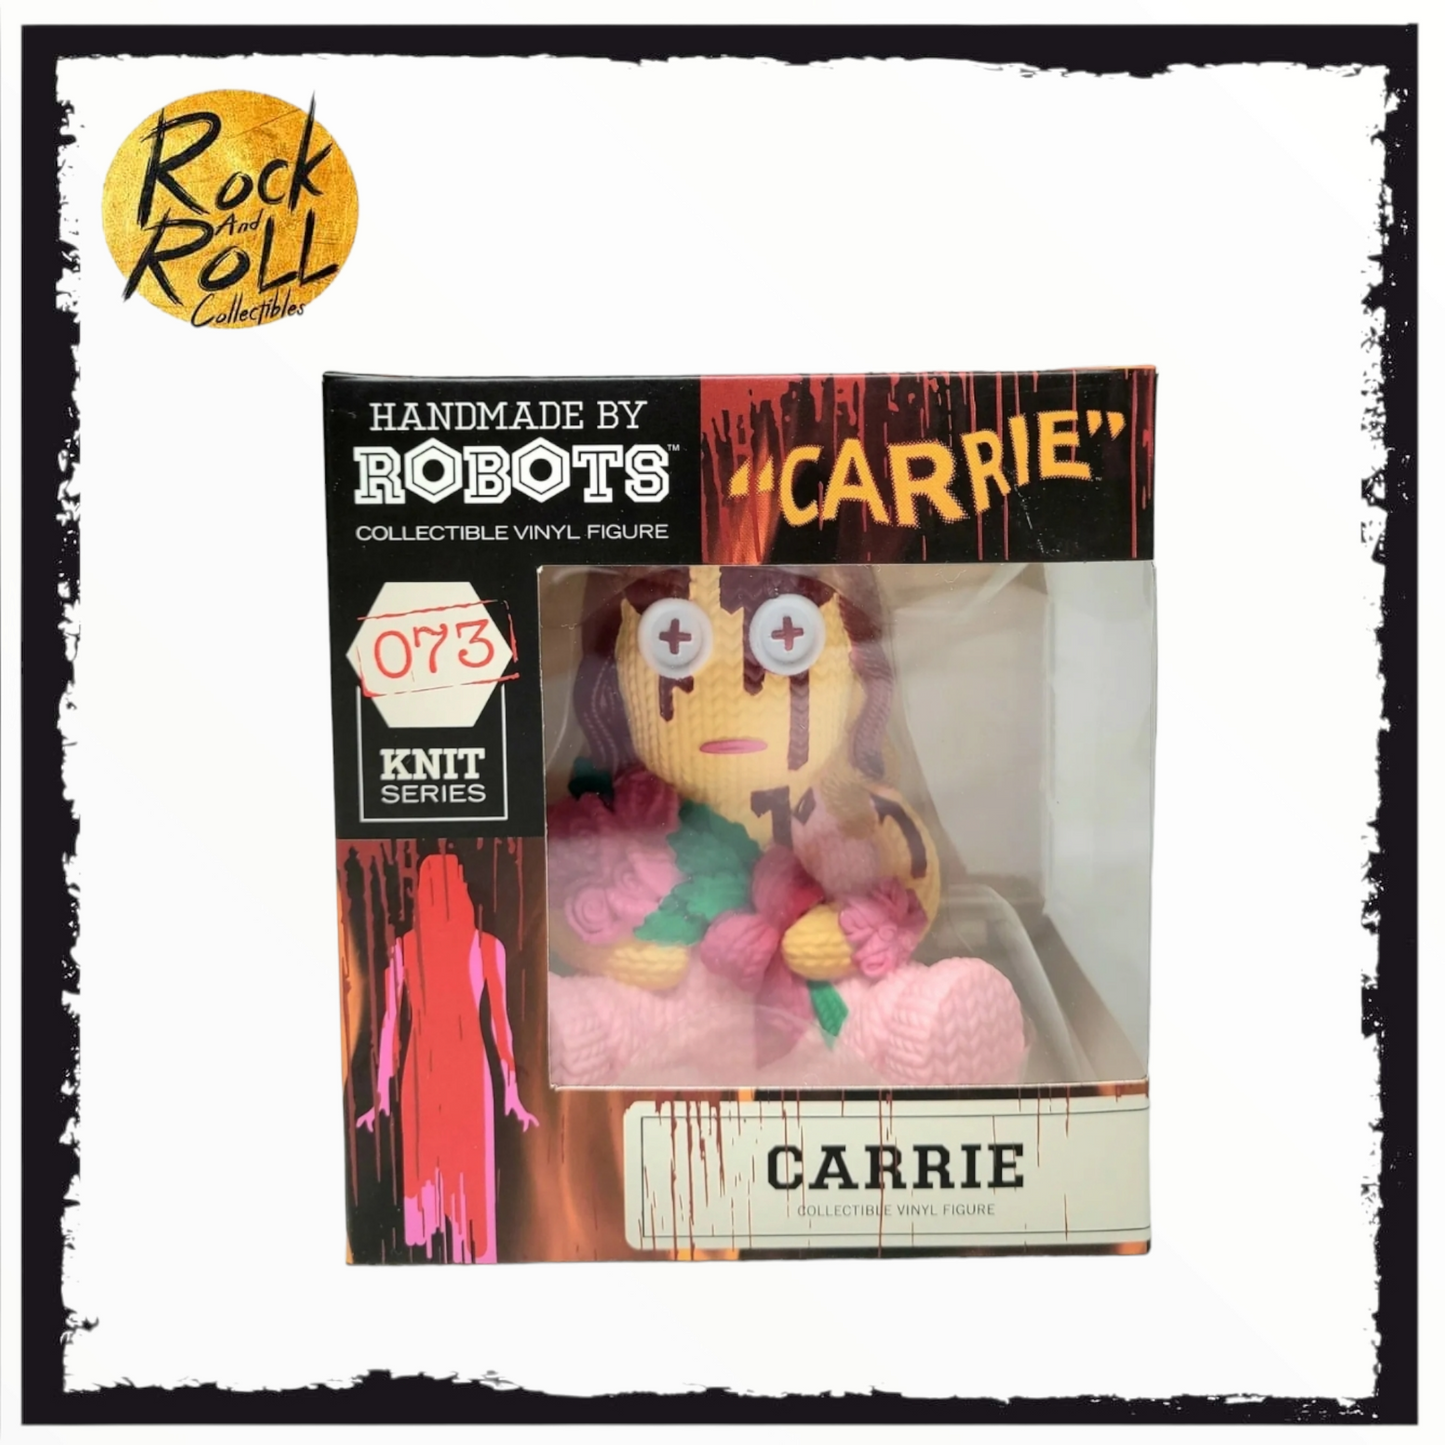 Handmade By Robots - Carrie #073